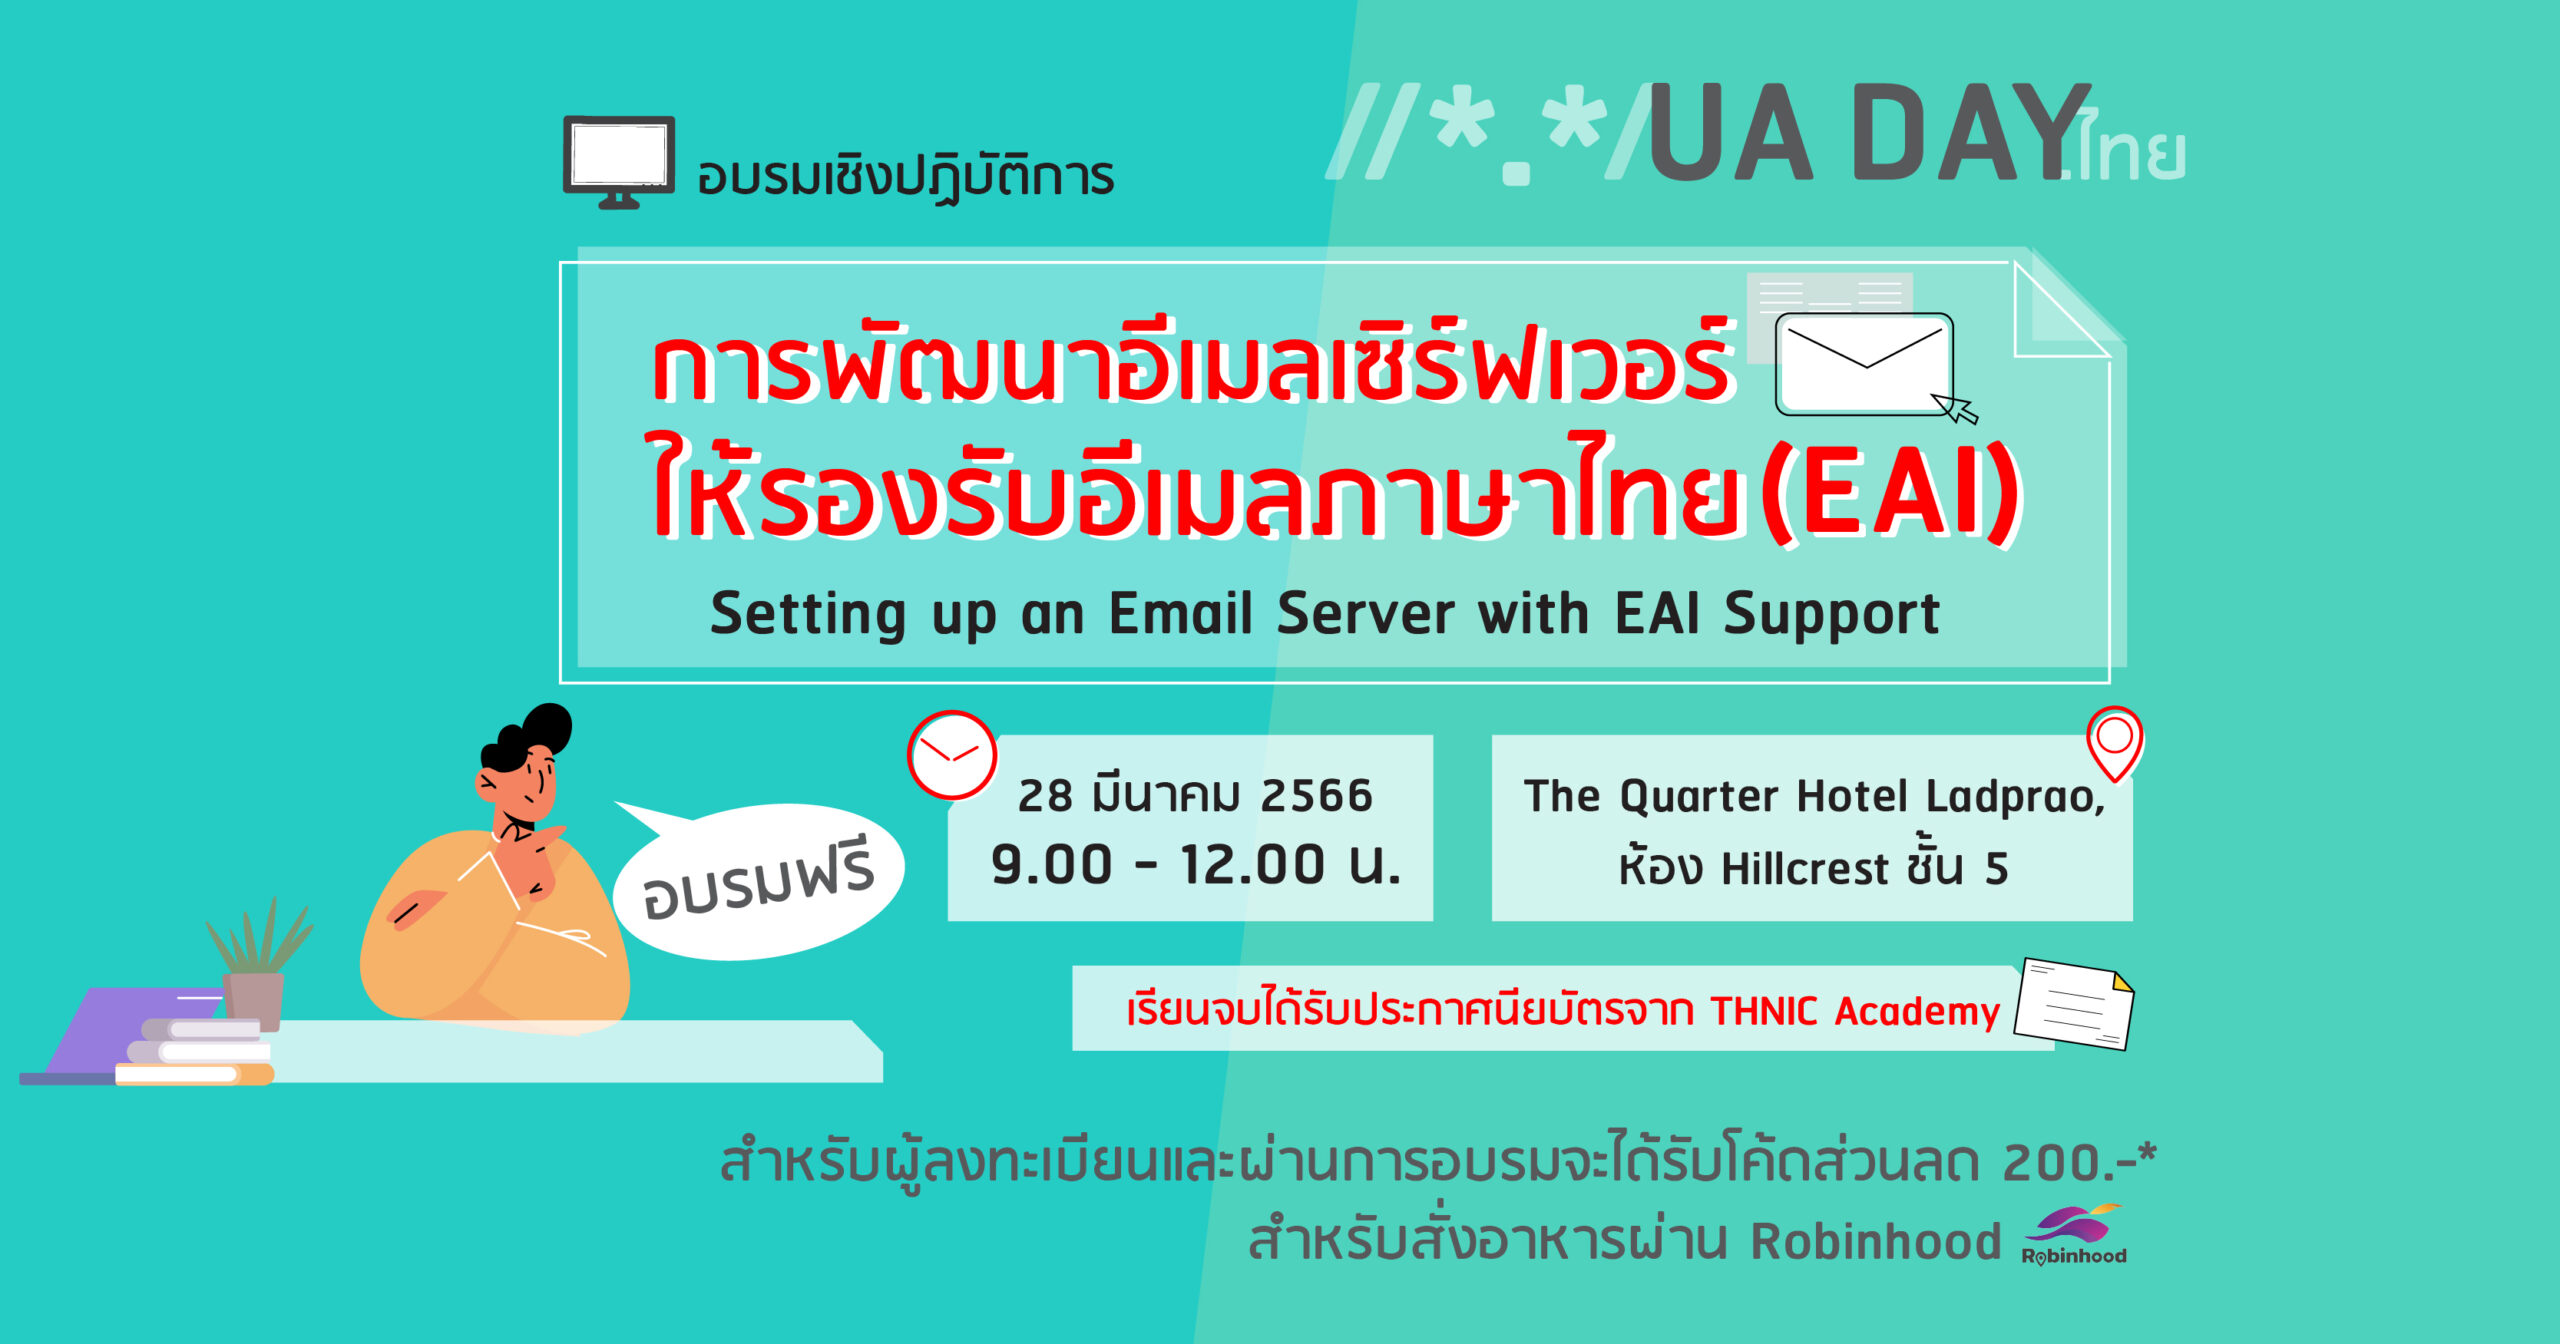 UA Day “Setting up an Email Server with EAI Support”